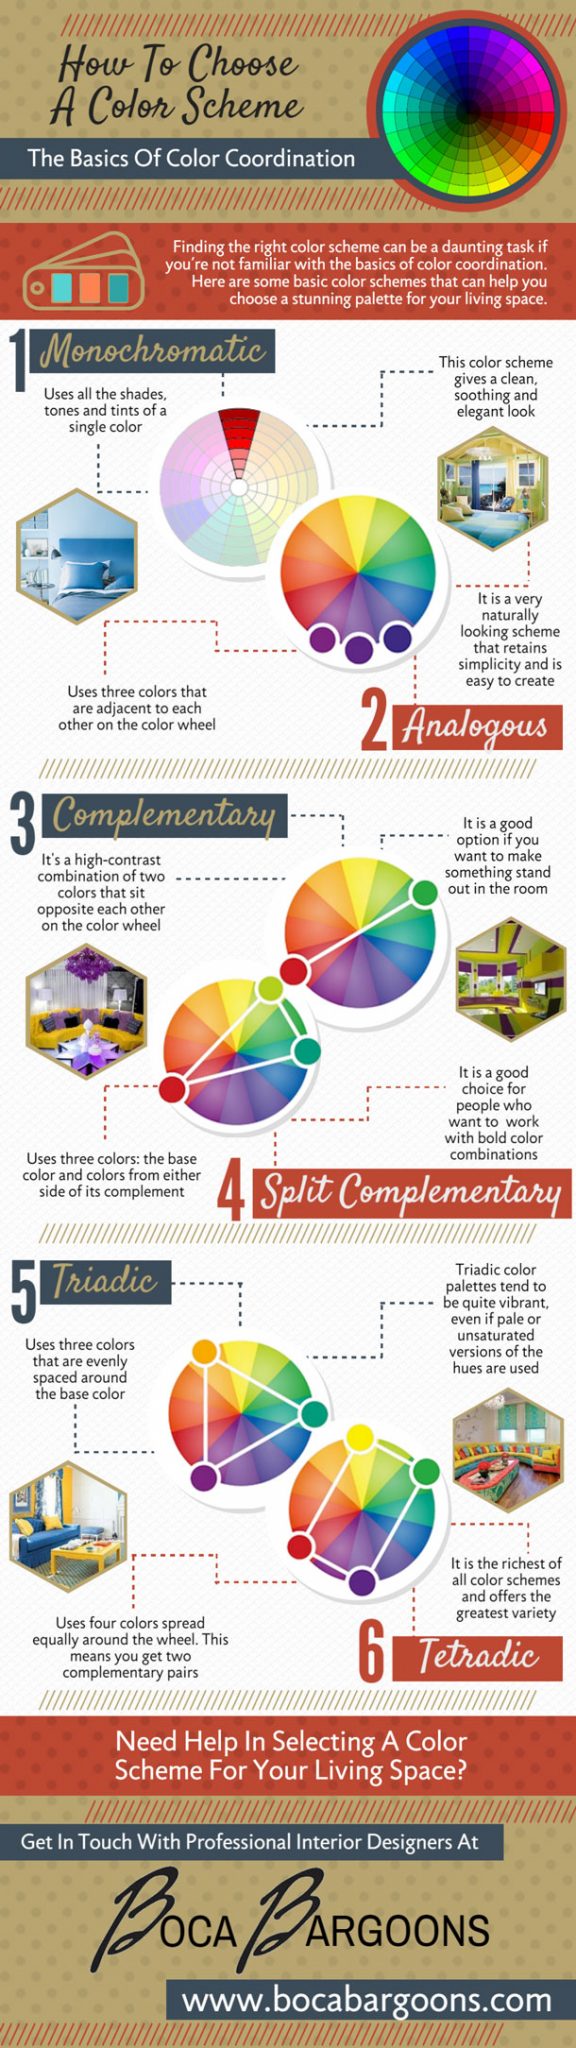 How to Choose a Color Scheme {Infographic} - Best Infographics